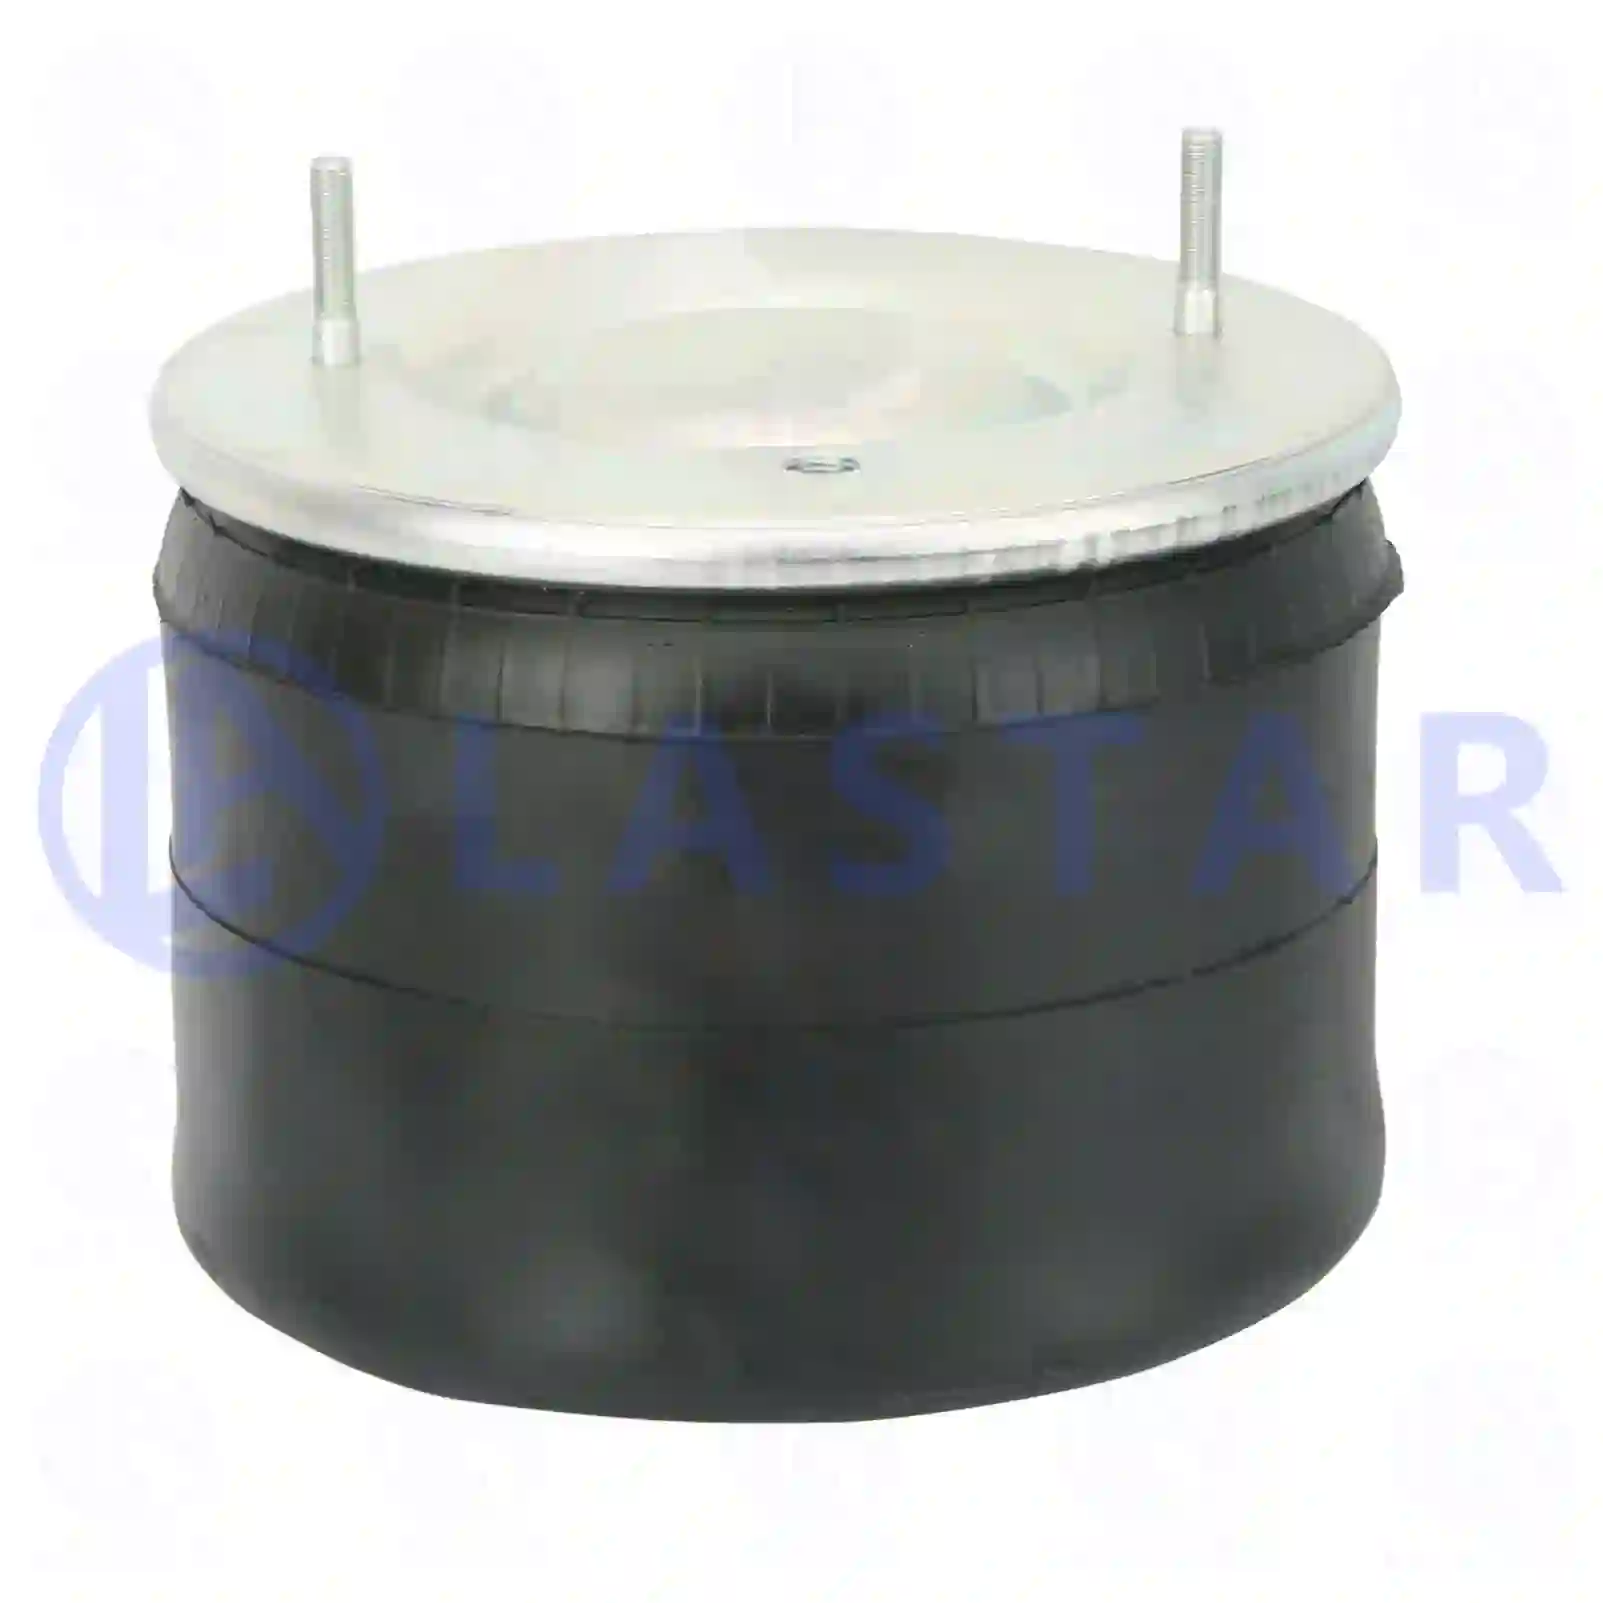 Air spring, with steel piston, 77727176, 1075365, 1629782, 20554761, , ||  77727176 Lastar Spare Part | Truck Spare Parts, Auotomotive Spare Parts Air spring, with steel piston, 77727176, 1075365, 1629782, 20554761, , ||  77727176 Lastar Spare Part | Truck Spare Parts, Auotomotive Spare Parts